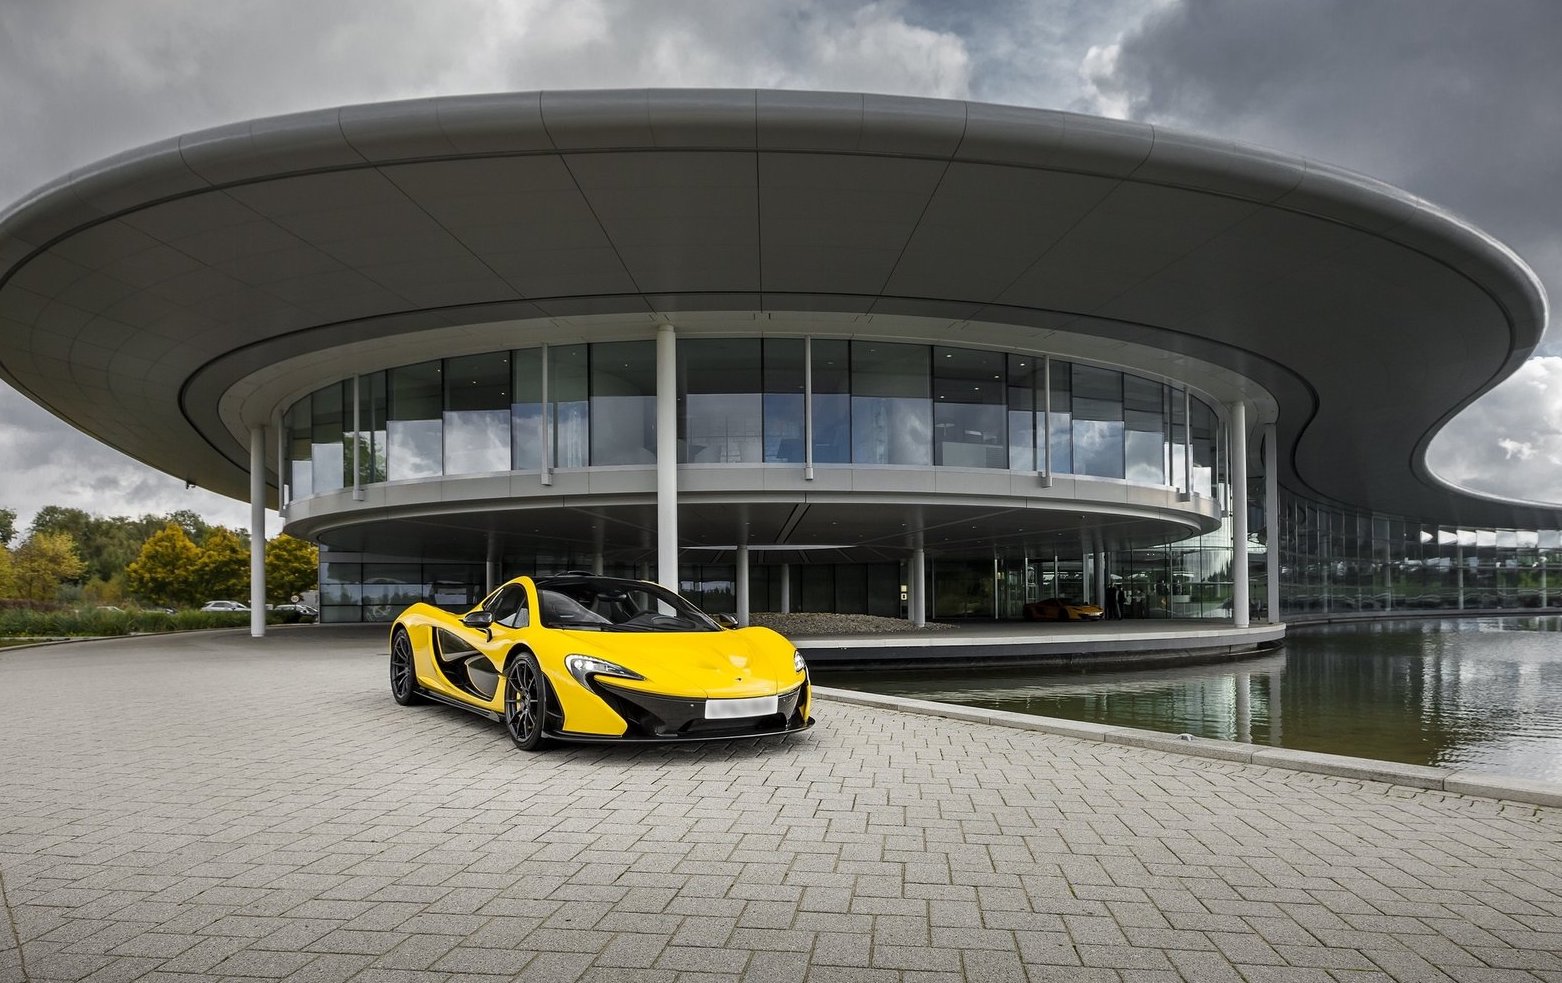 McLaren selling its Woking headquarters to GNL for £170m